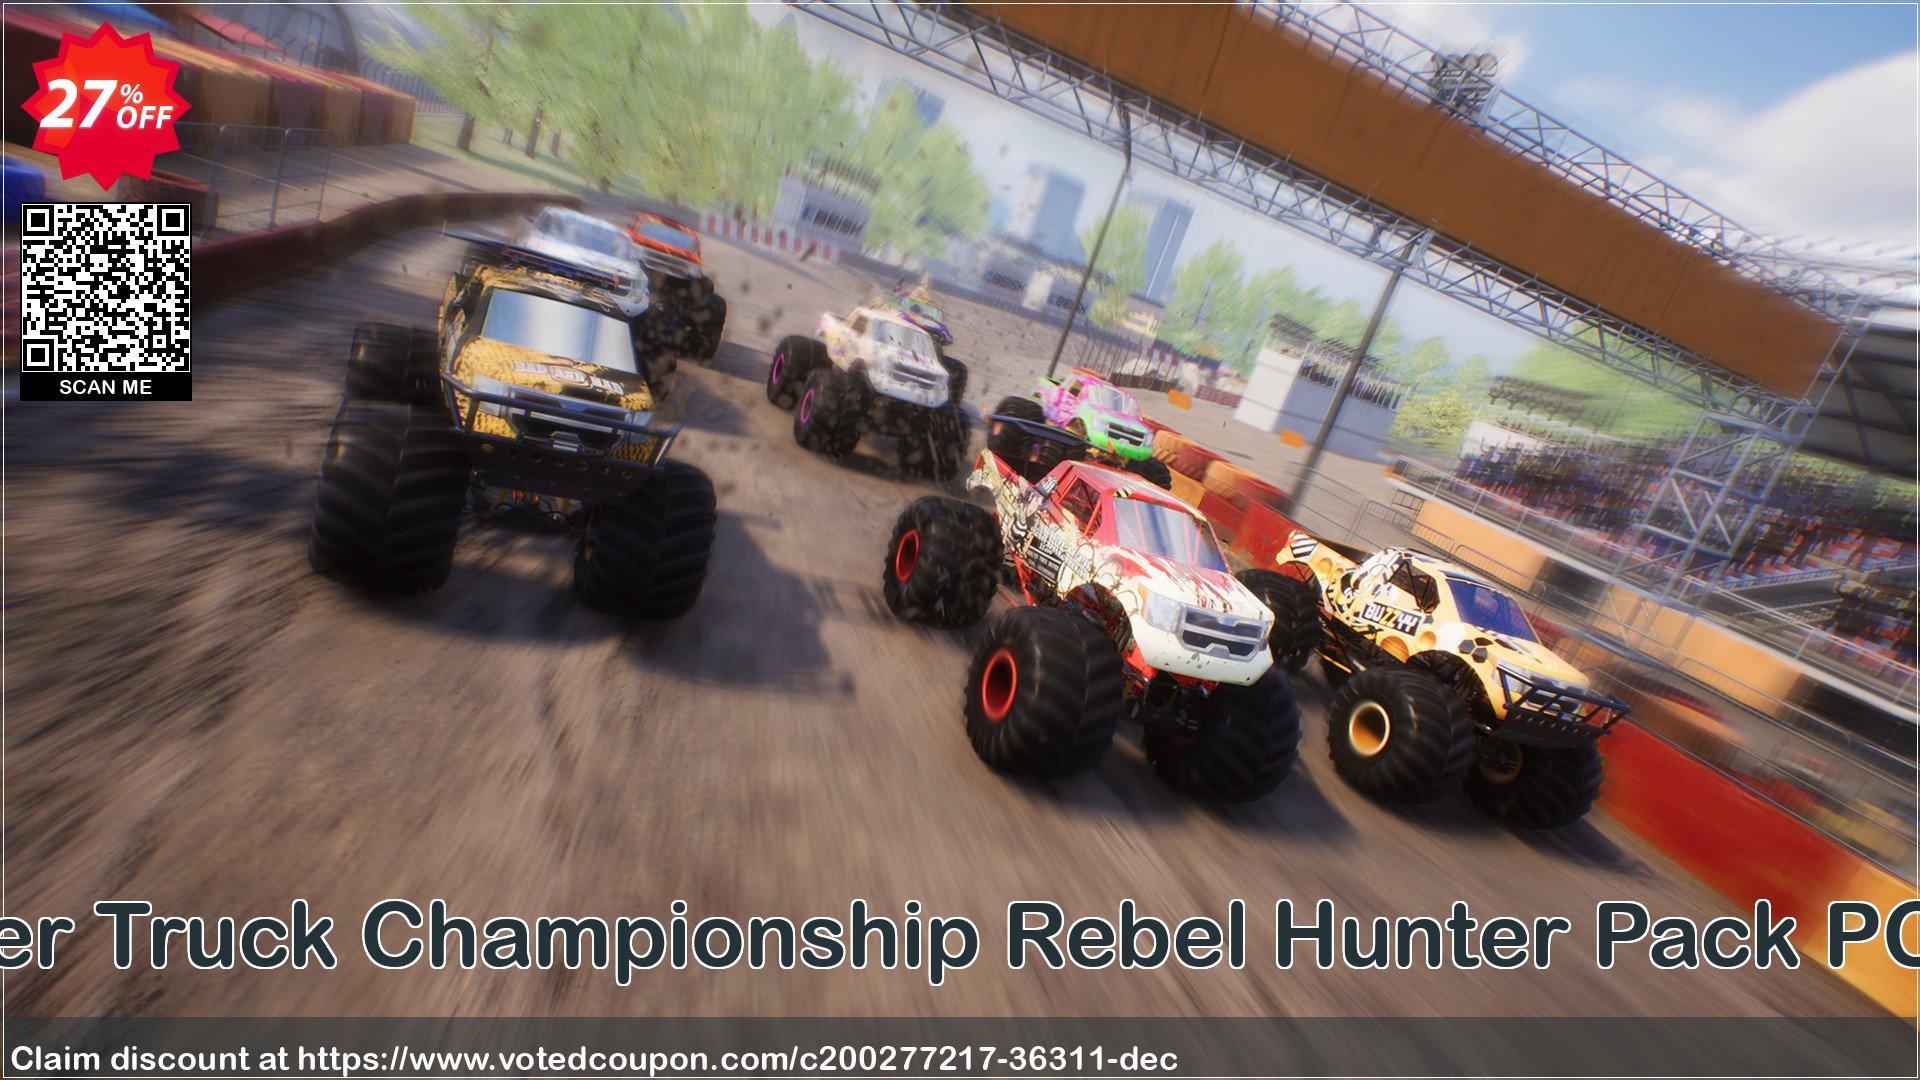 Monster Truck Championship Rebel Hunter Pack PC - DLC Coupon Code Apr 2024, 27% OFF - VotedCoupon